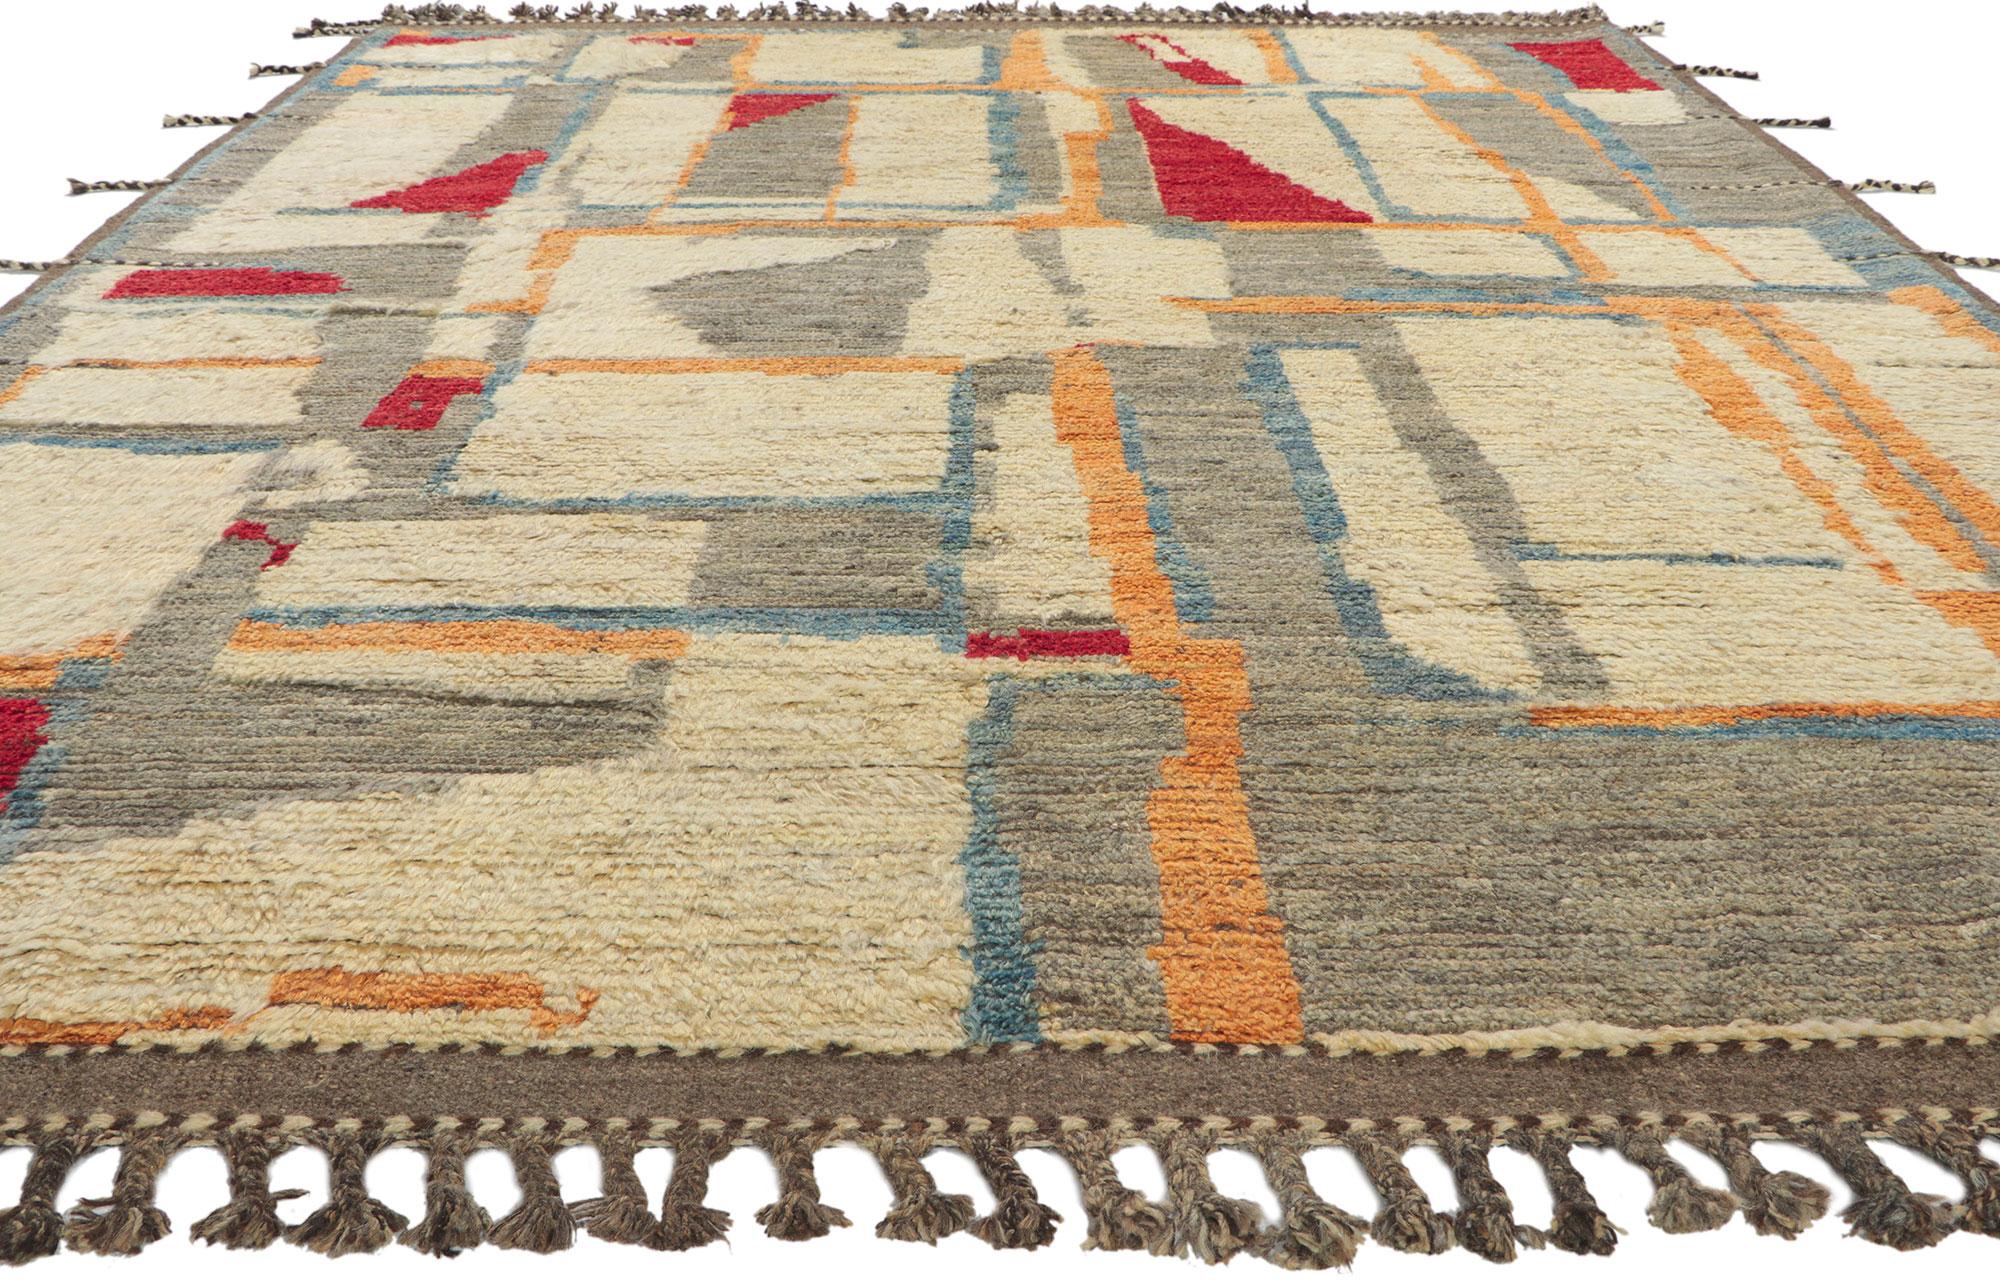 Pakistani Modern Moroccan Area Rug, Abstract Cubism Meets Gunta Stolzl Bauhaus Style For Sale